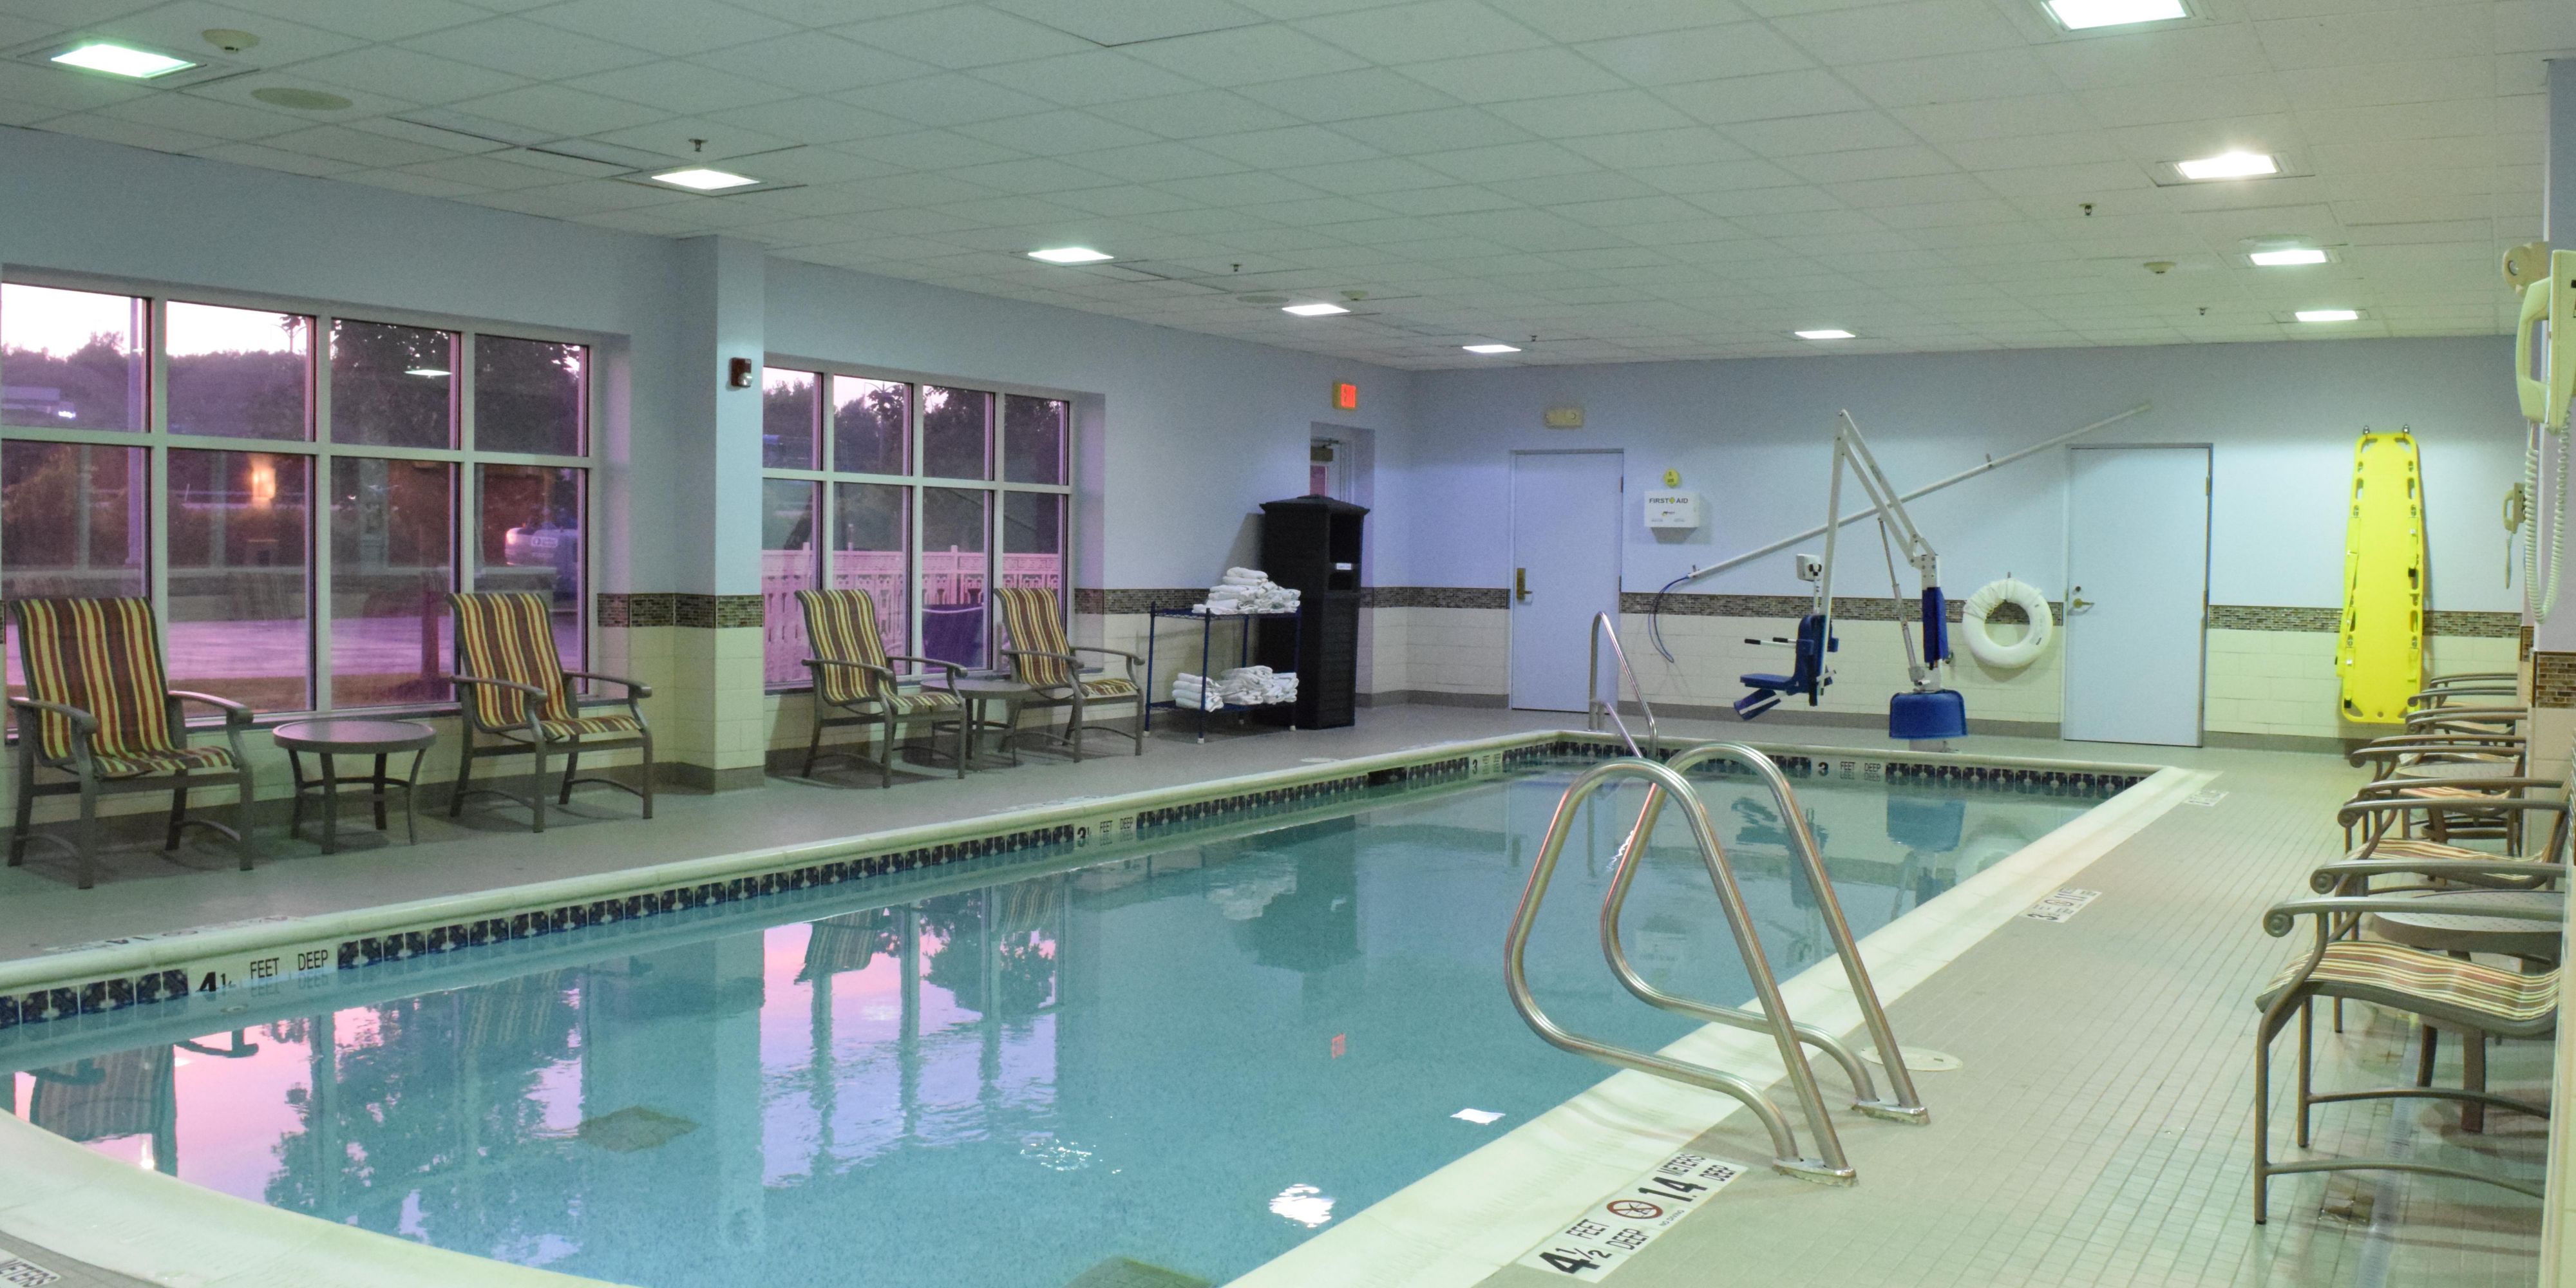 In town with the kids? They will love our Heated Indoor Pool, which is open from 7:00am until 10:00pm daily. Also Located on premises is a fitness facility equipped with an exercise bike, a treadmill, and an elliptical machine that is open and available 24 hours a day.